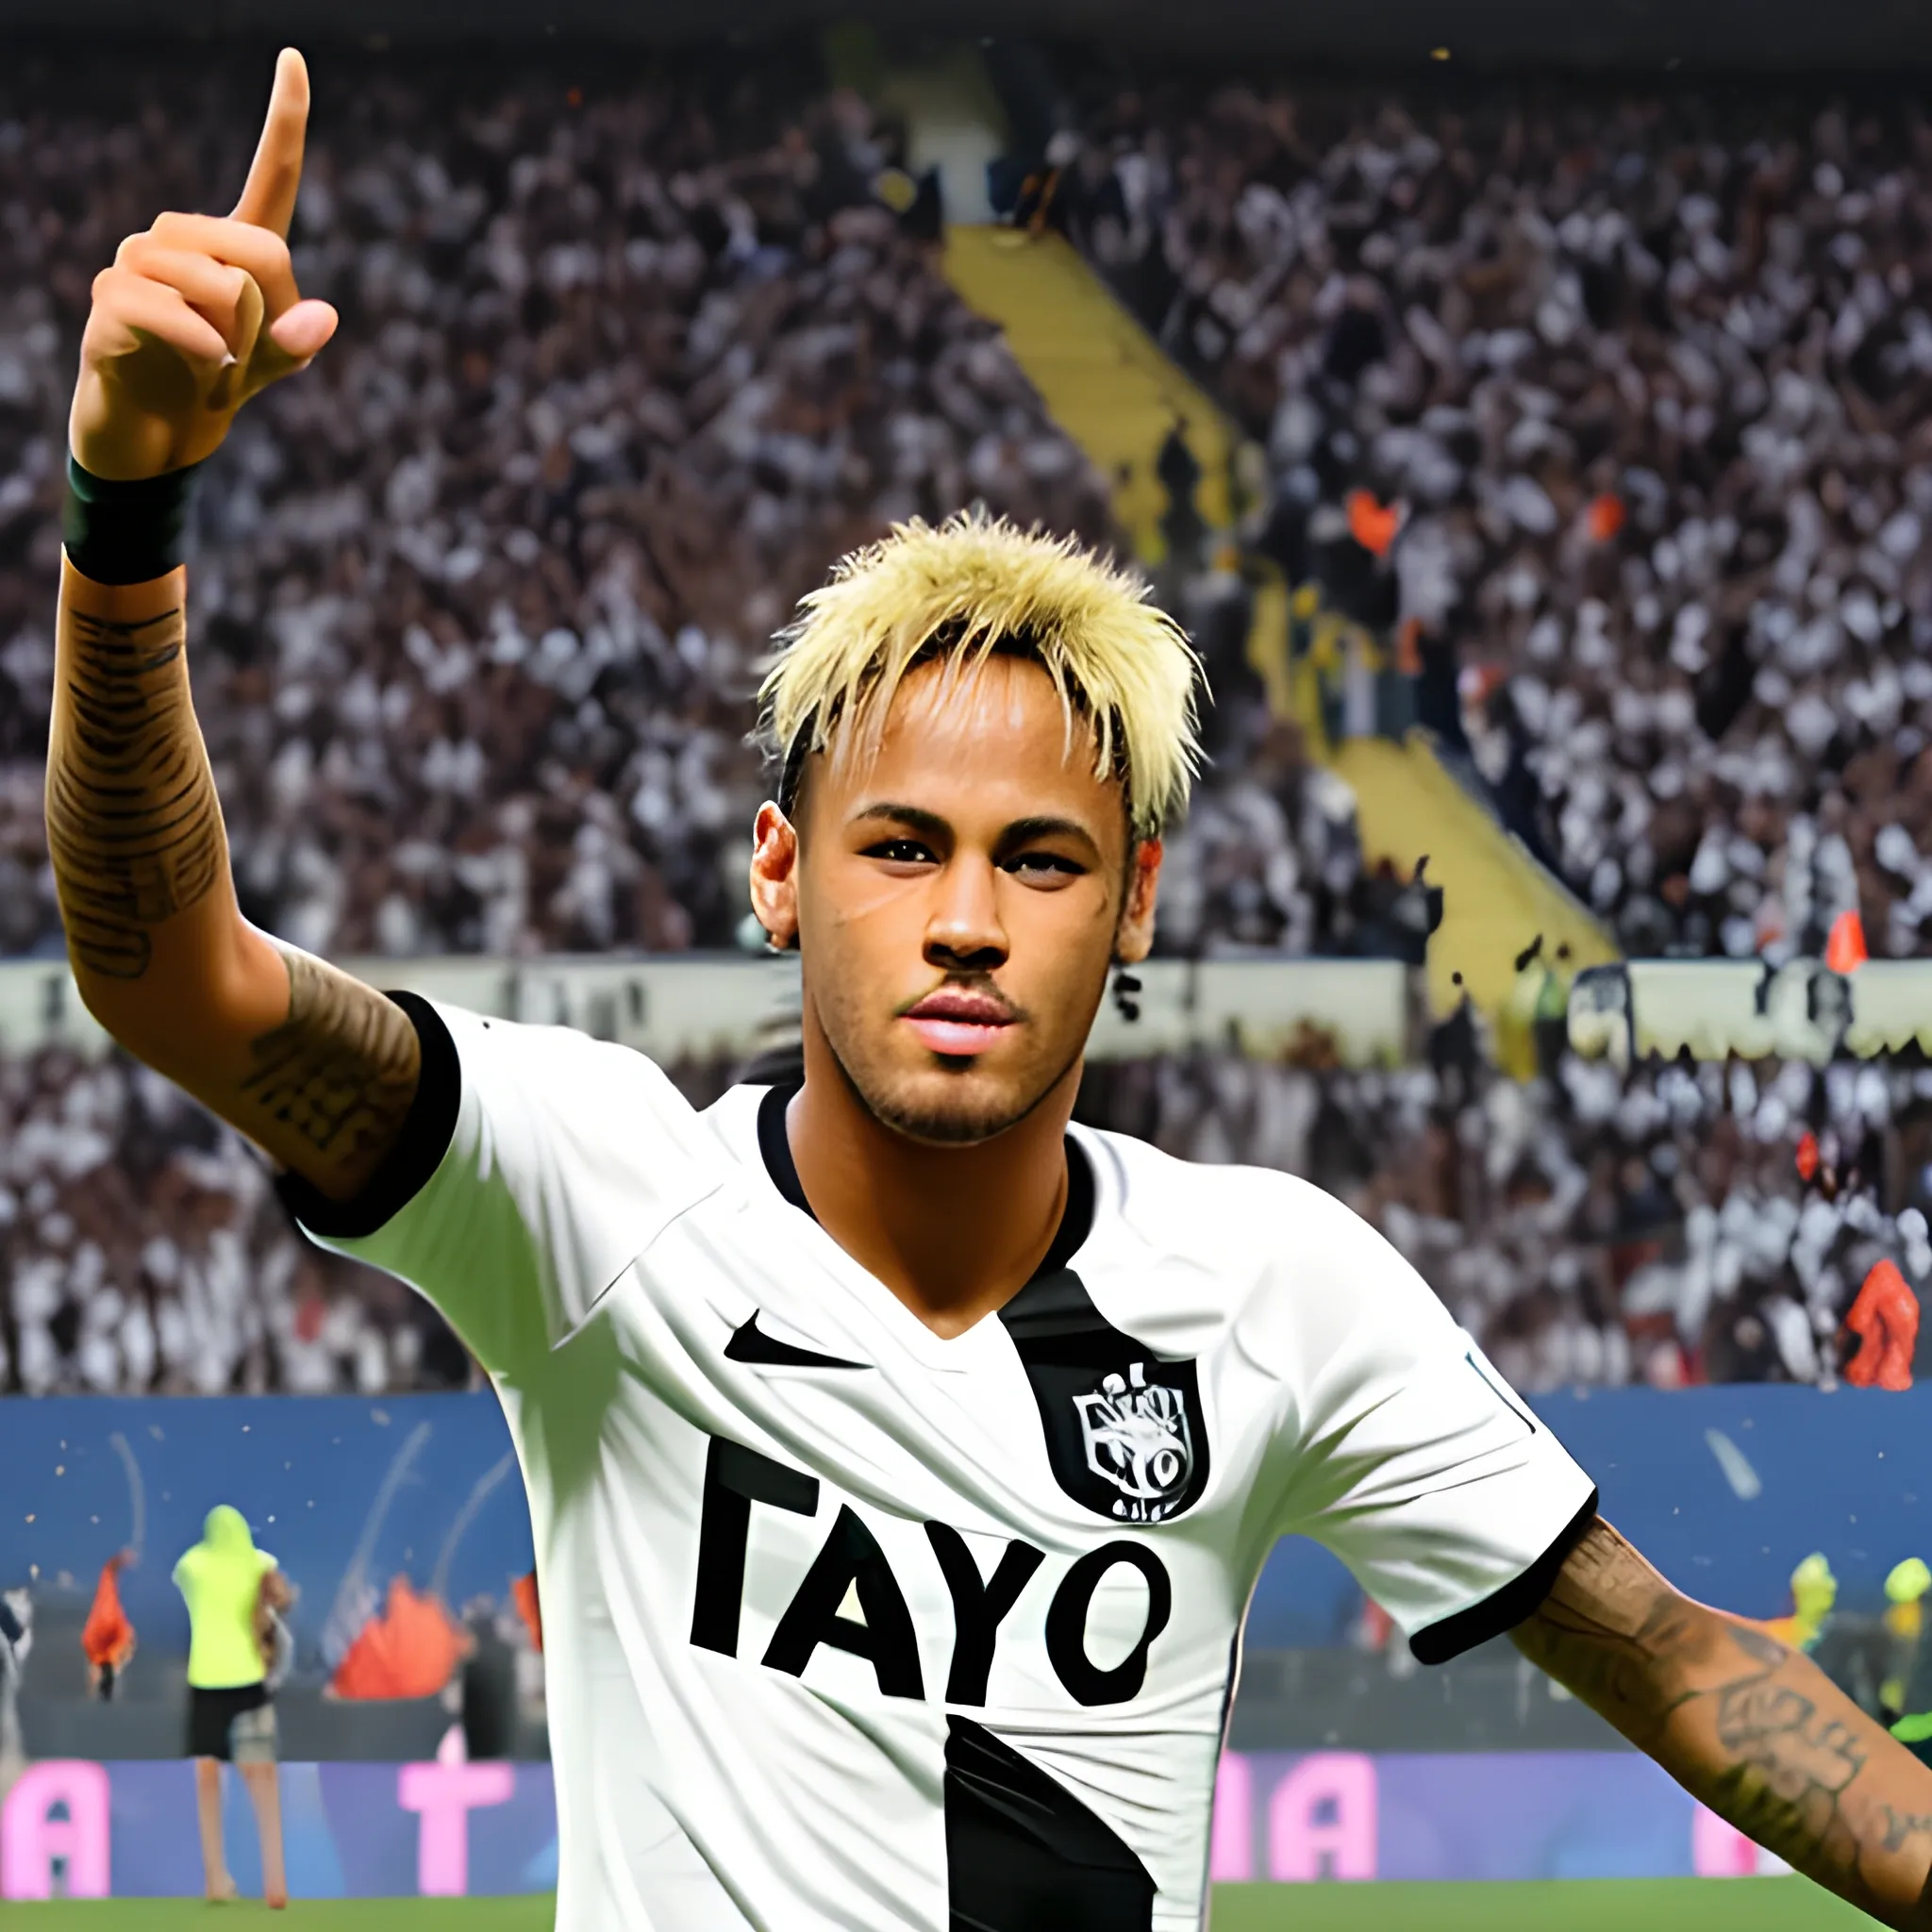 Neymar playing for Corinthians football club, and celebrating a goal with the fans